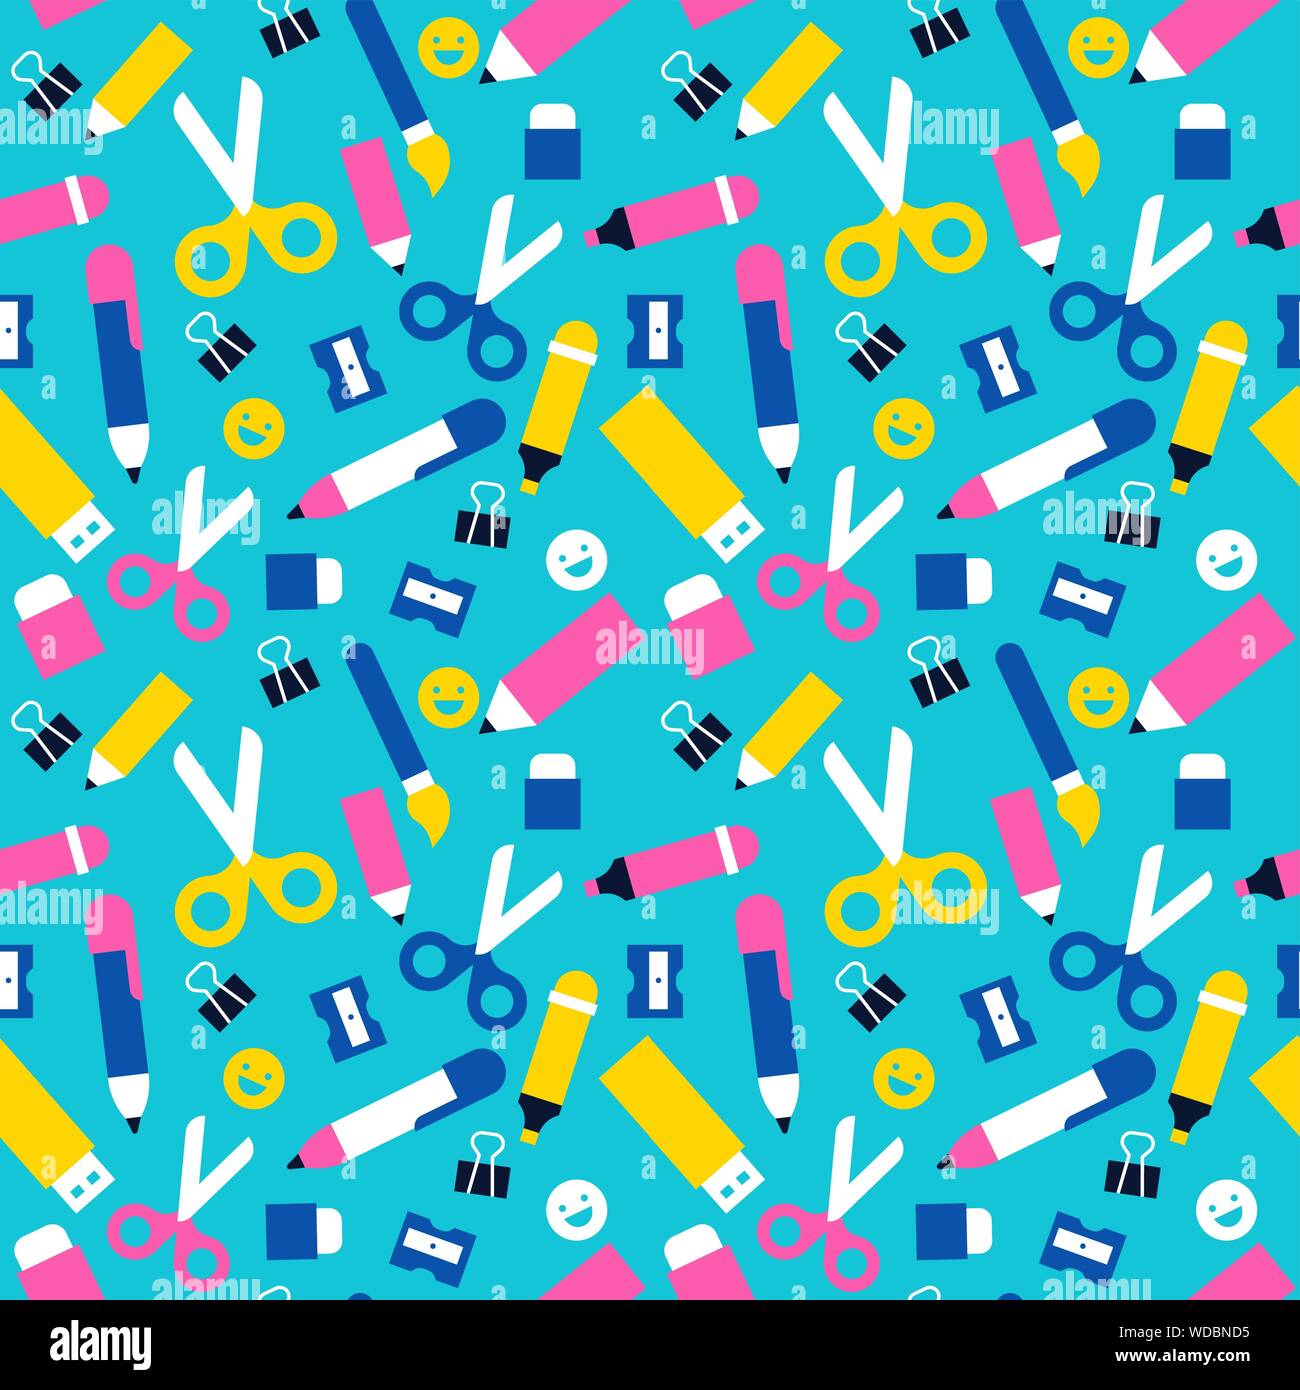 School seamless pattern illustration of colorful class supplies icons. Fun children education background in modern flat cartoon style. Stock Vector